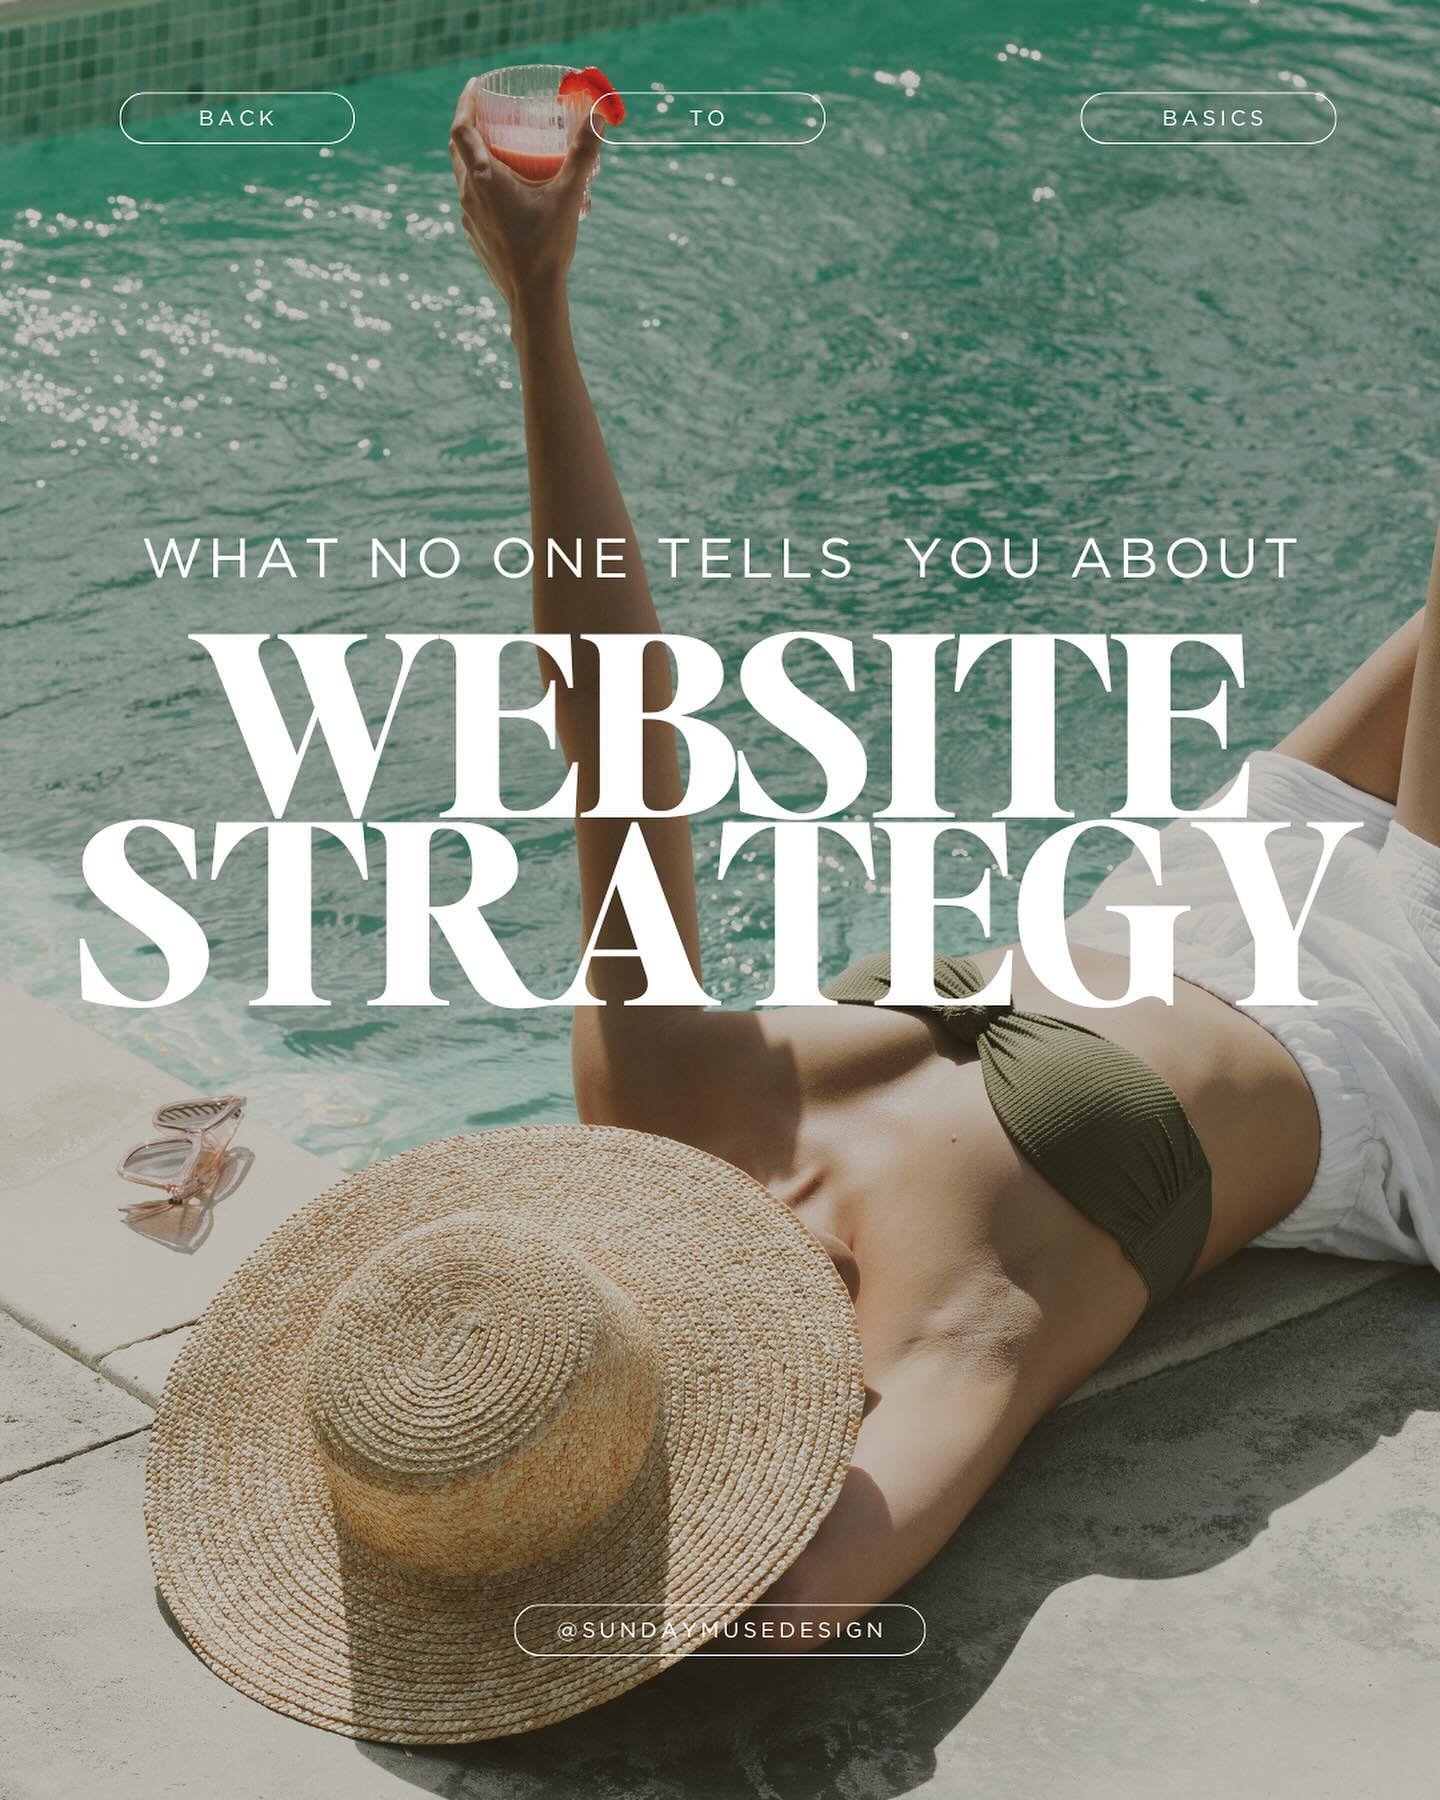 Okay...what&rsquo;s up with website strategy? Why does it sound like some high-flying corporate buzzword?

Website strategy is one of those things people often make more complicated than it needs to be. 

So let&rsquo;s break it down: At its core, a 